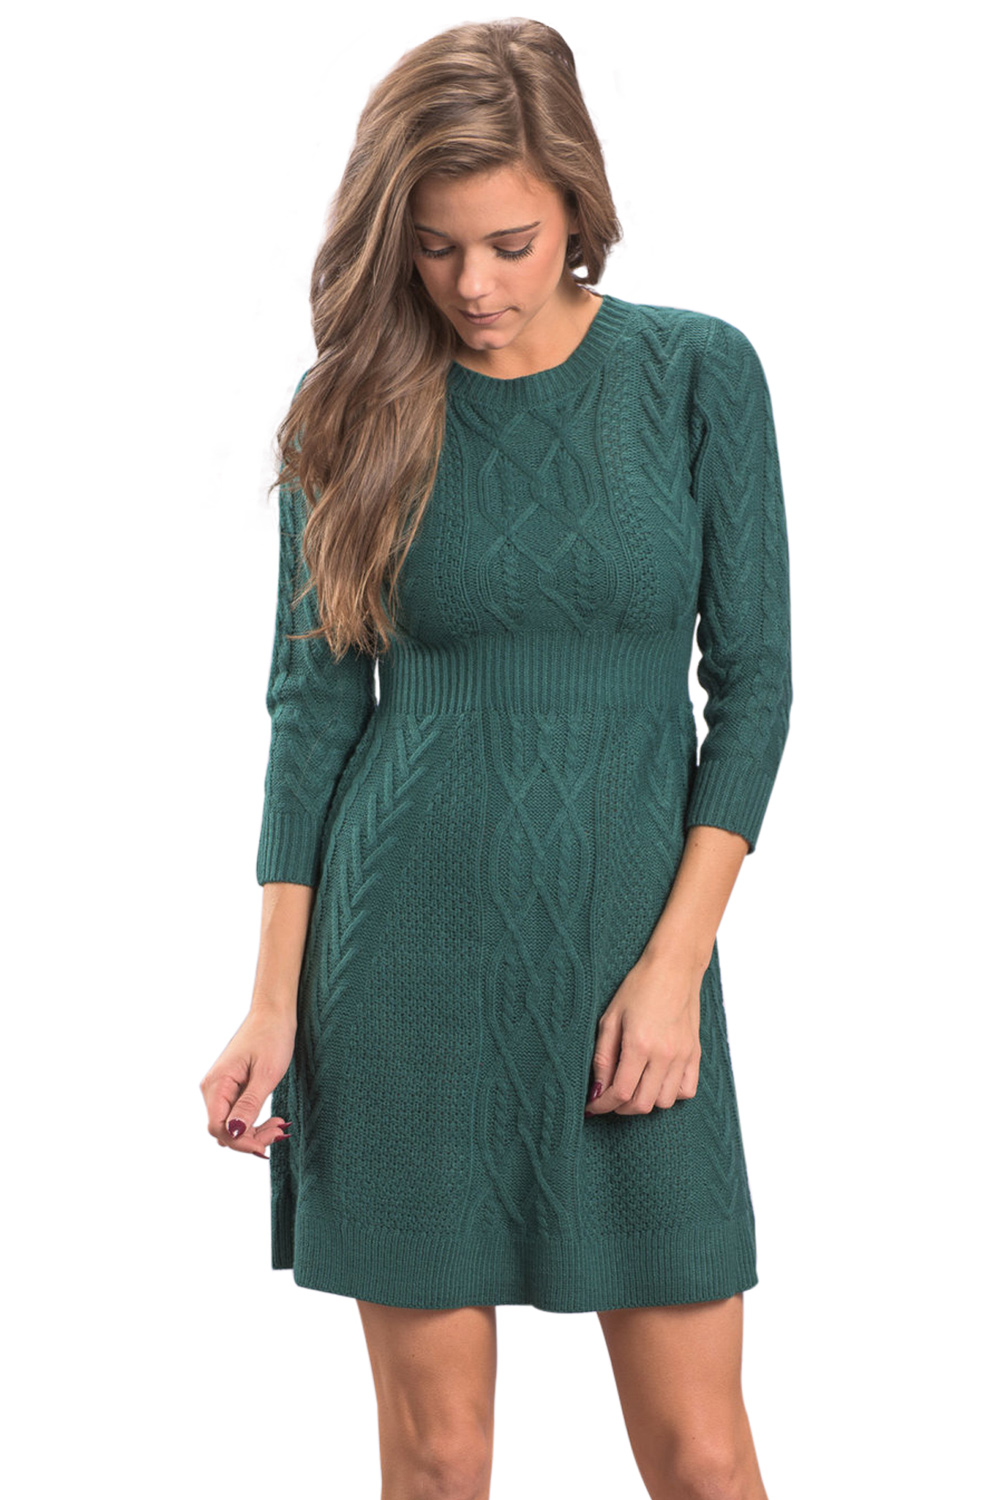 BY27692-9 Green Cable Knit Fitted Sweater Dress